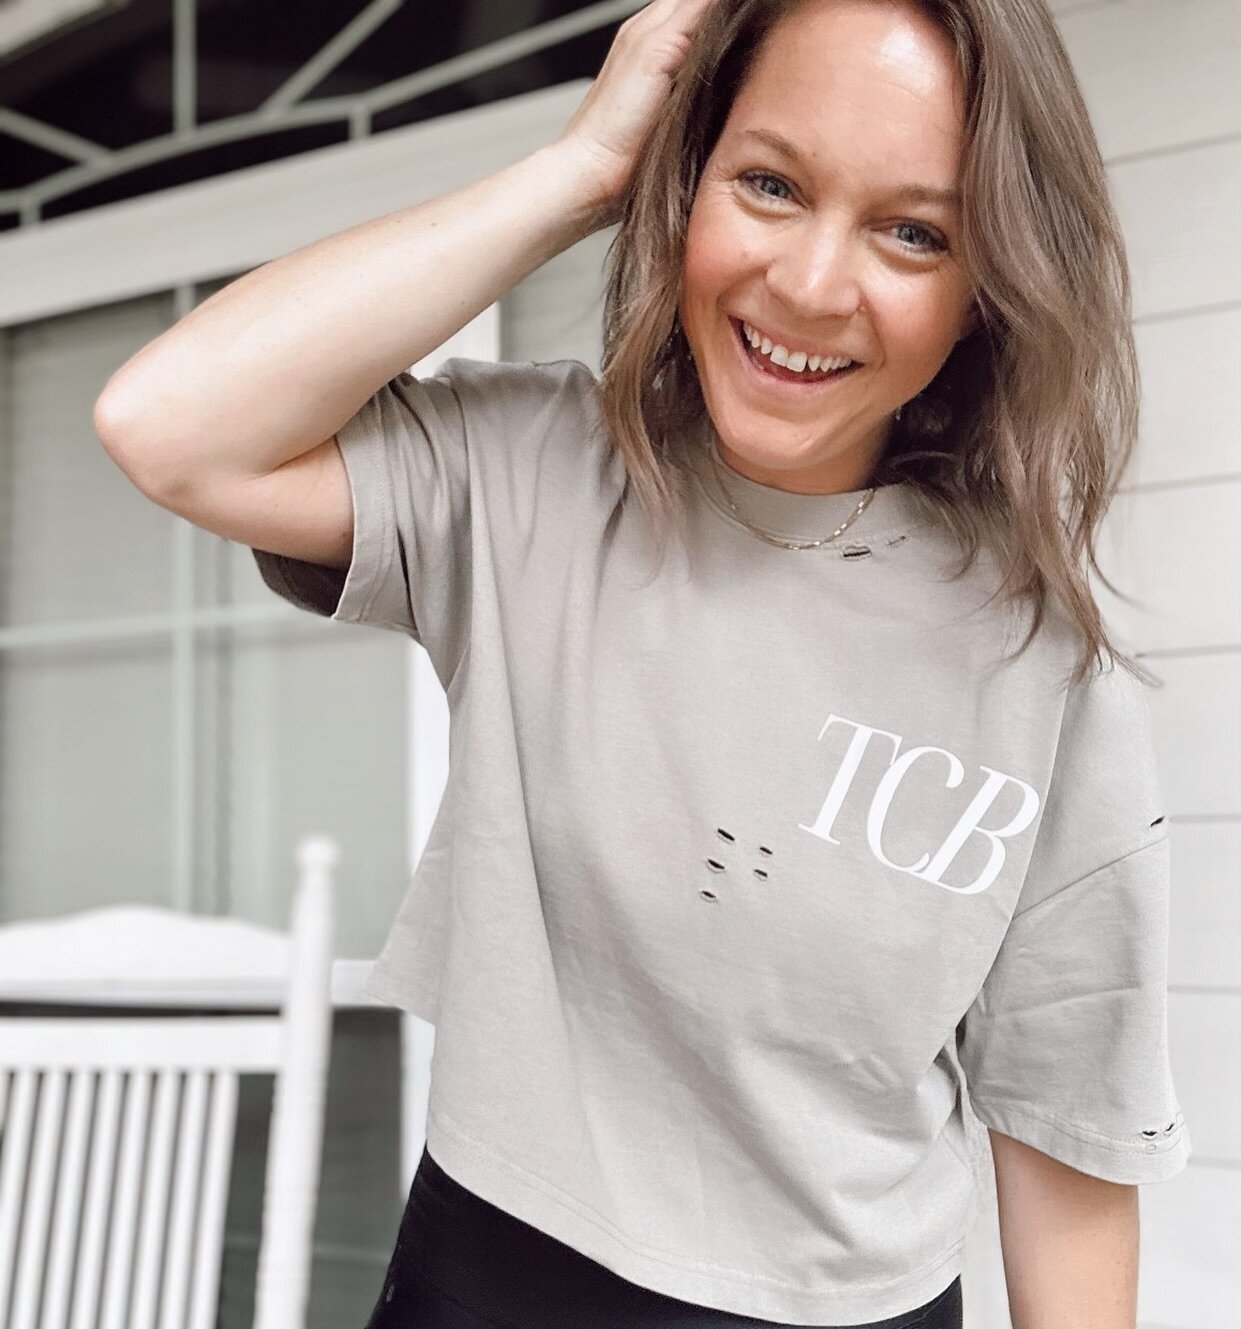 Storefront is officially open in 3 days and I am so excited! One of my favorite people in the new TCB Vintage Distressed Crop &amp; the Lindsay Necklace (named after her)&mdash; two items I just absolutely love. People ask me all of the time &ldquo;w